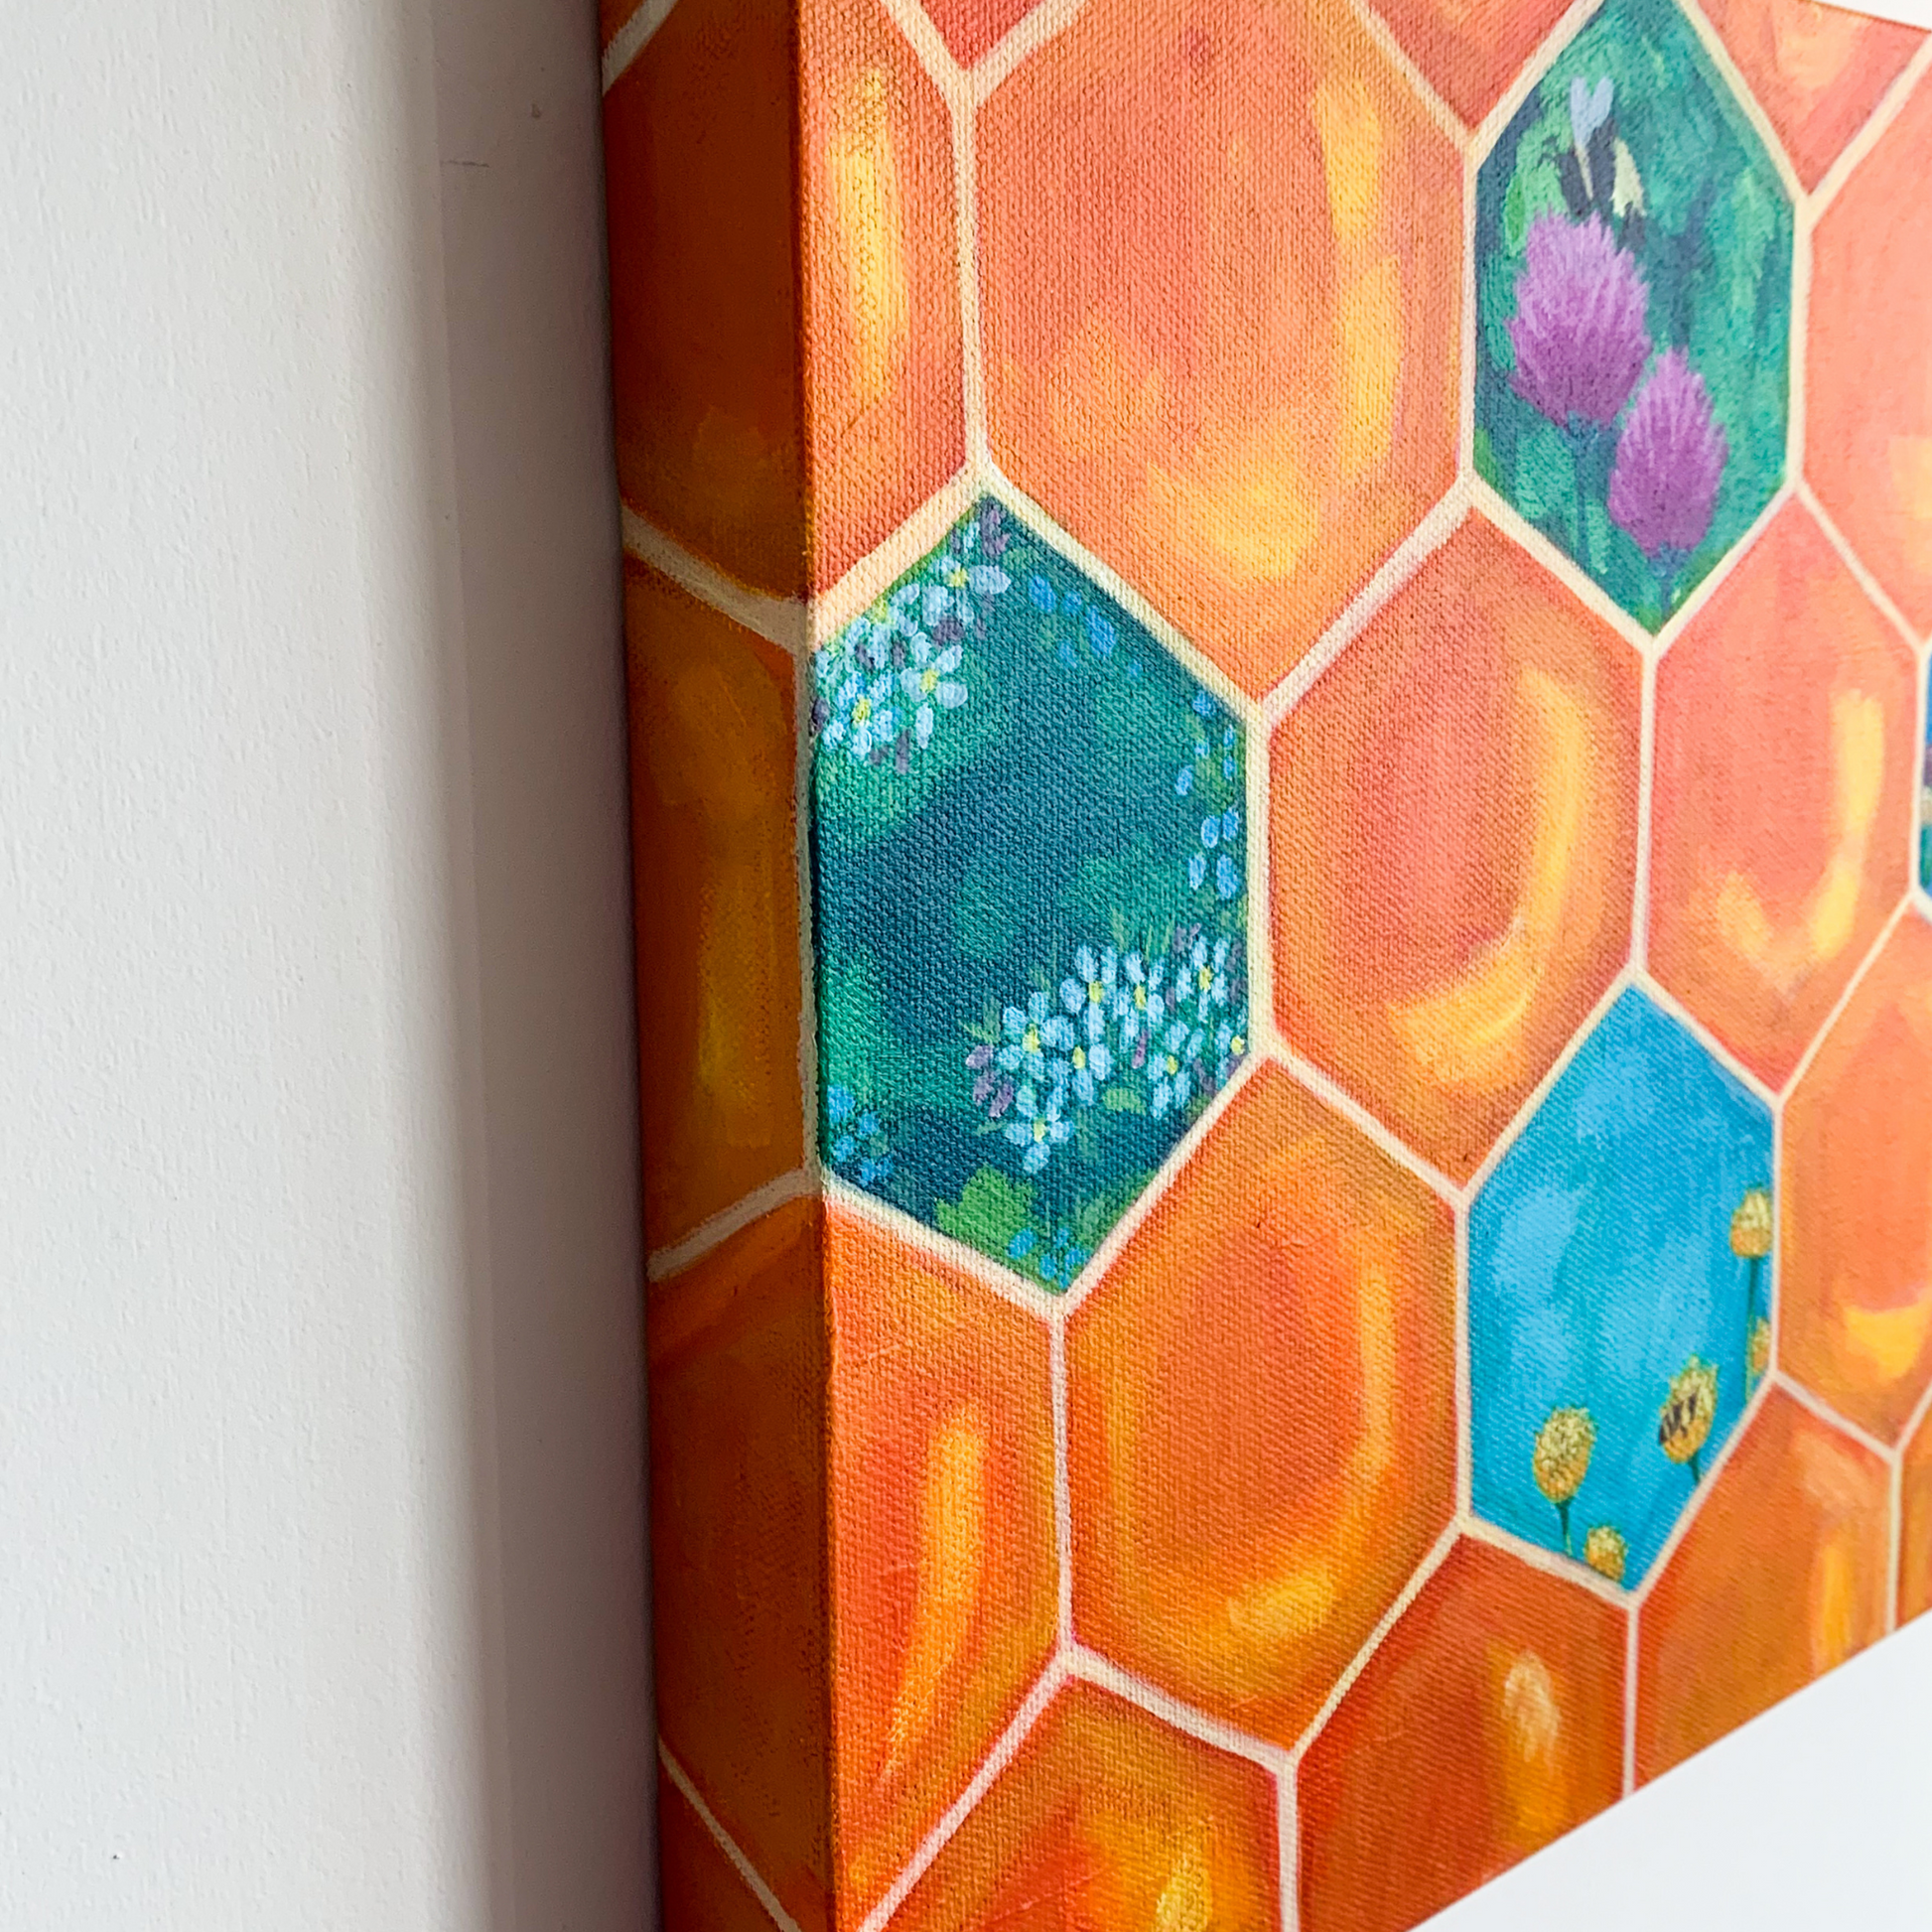 The side of the honeycomb painting showing the edges painted in orange honeycomb.